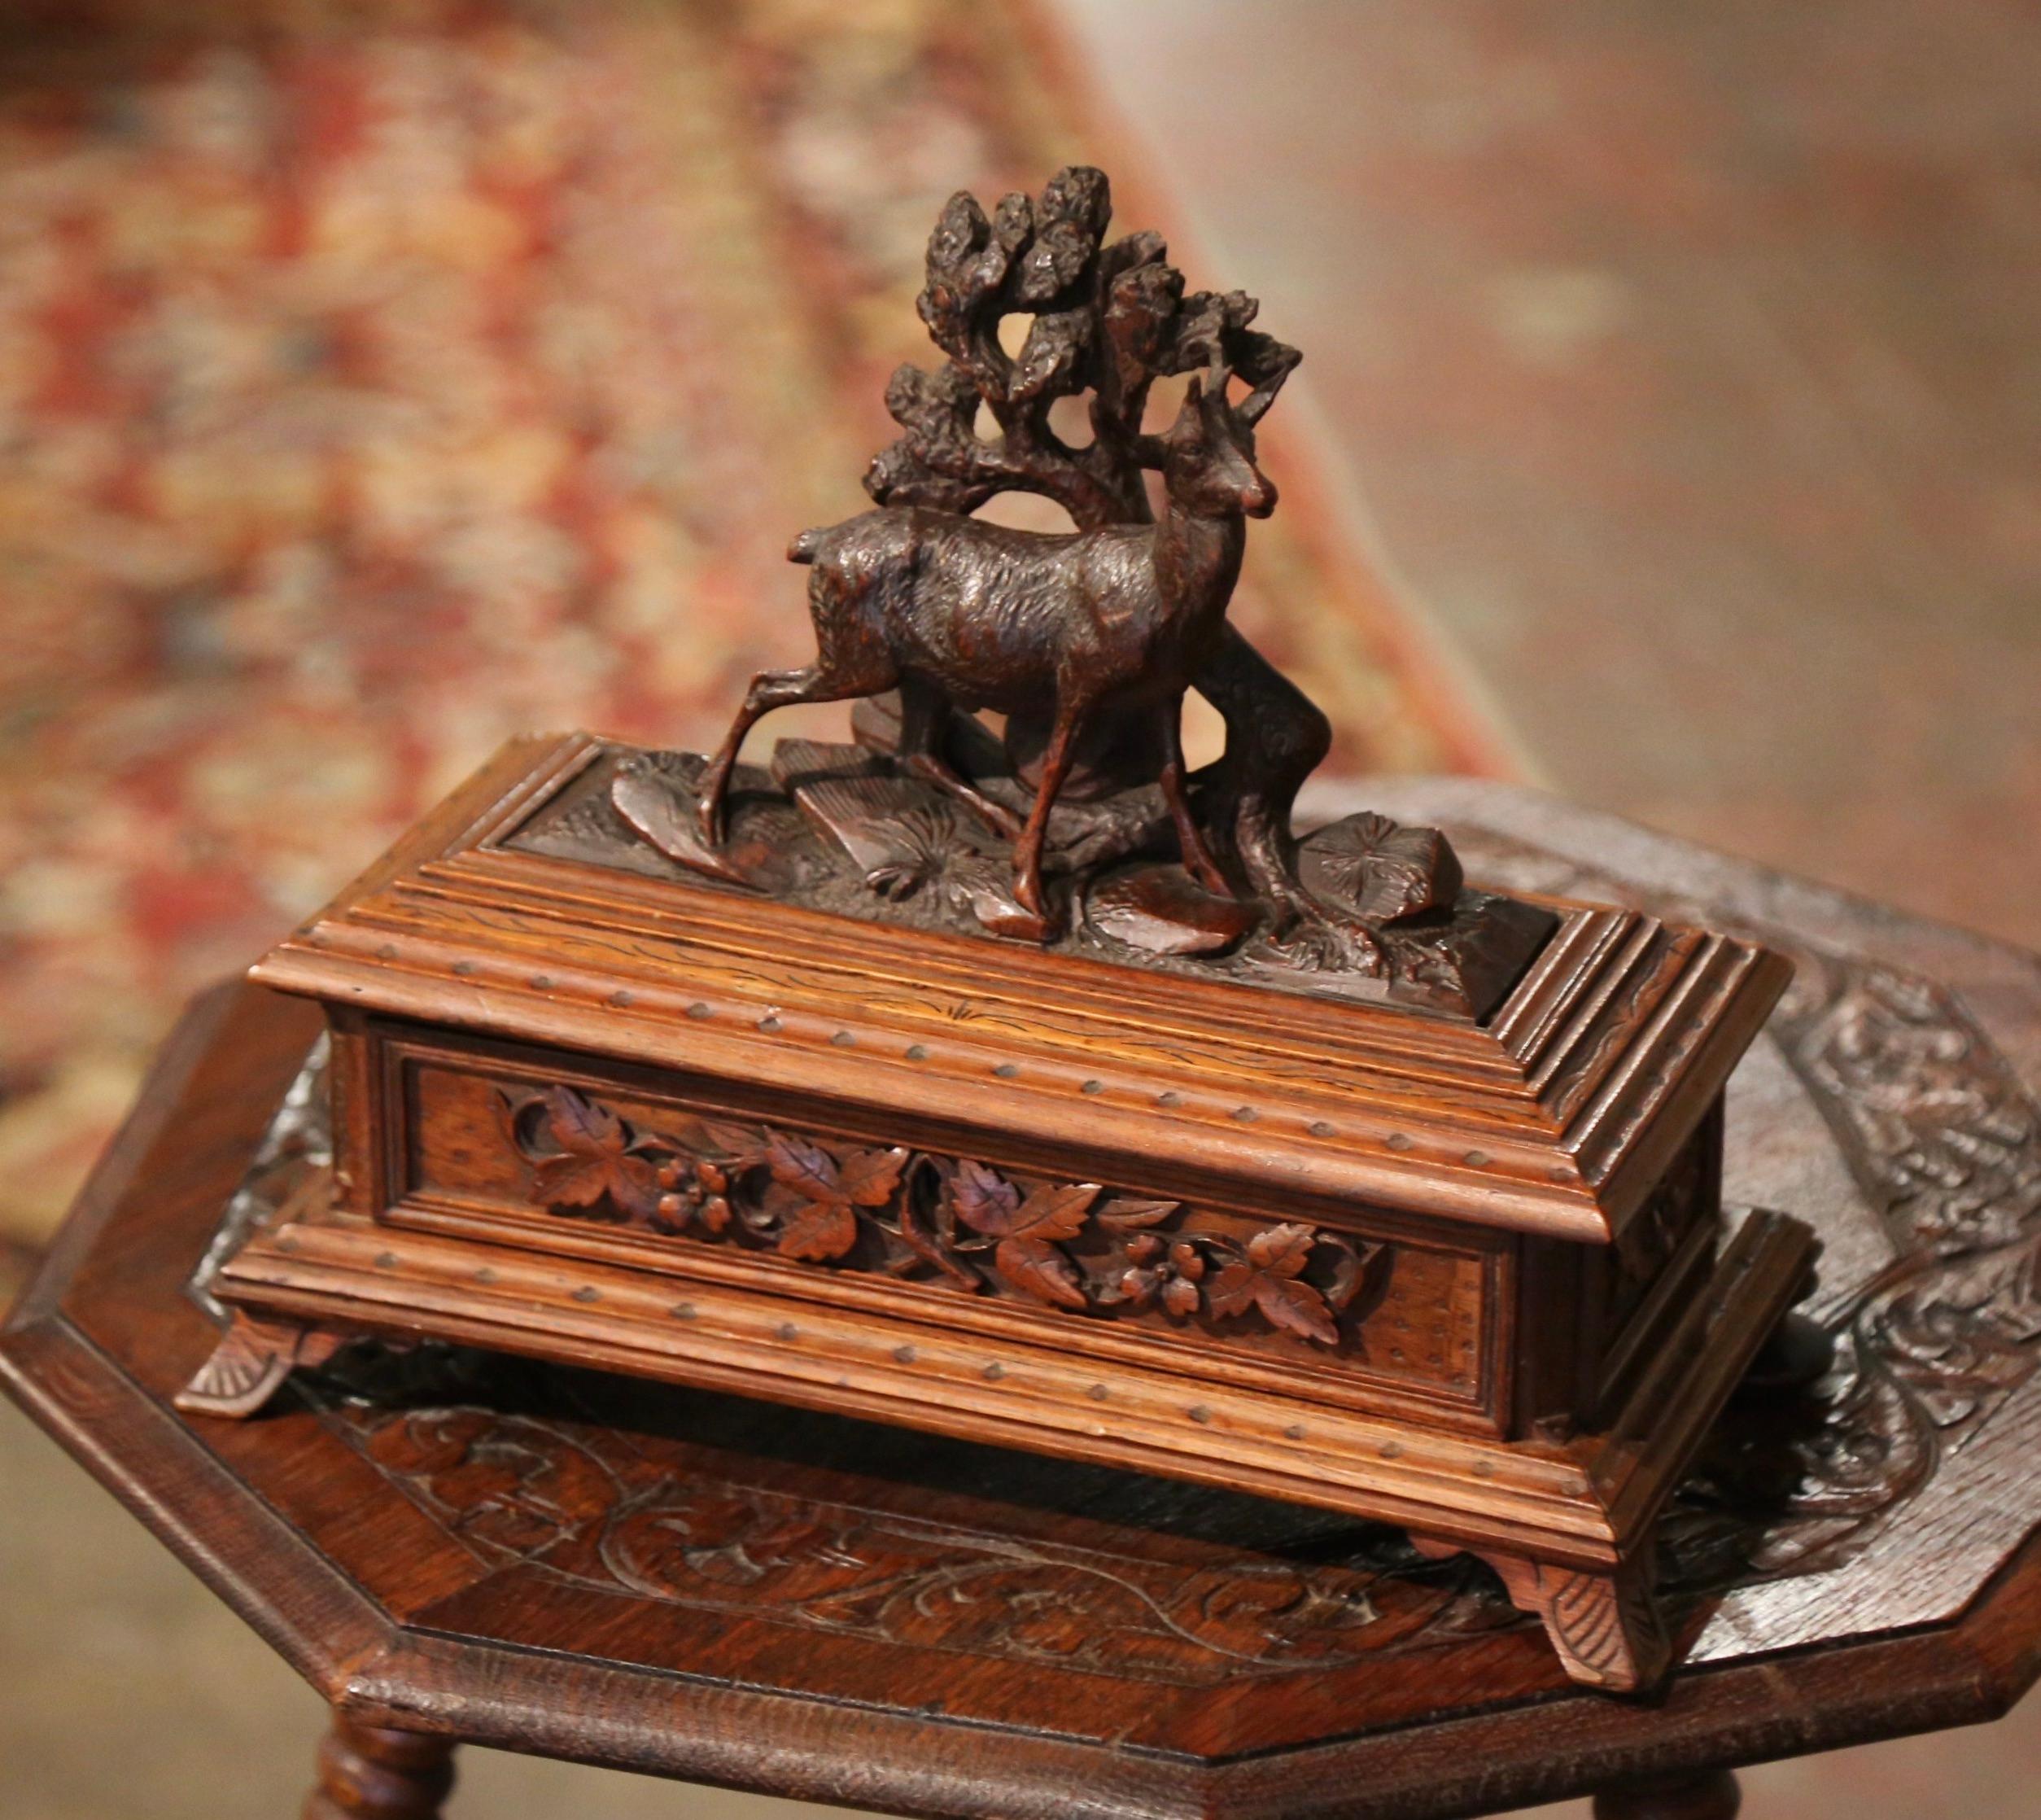 Hand-Carved 19th Century French Black Forest Carved Walnut Jewelry Box with Deer Motifs